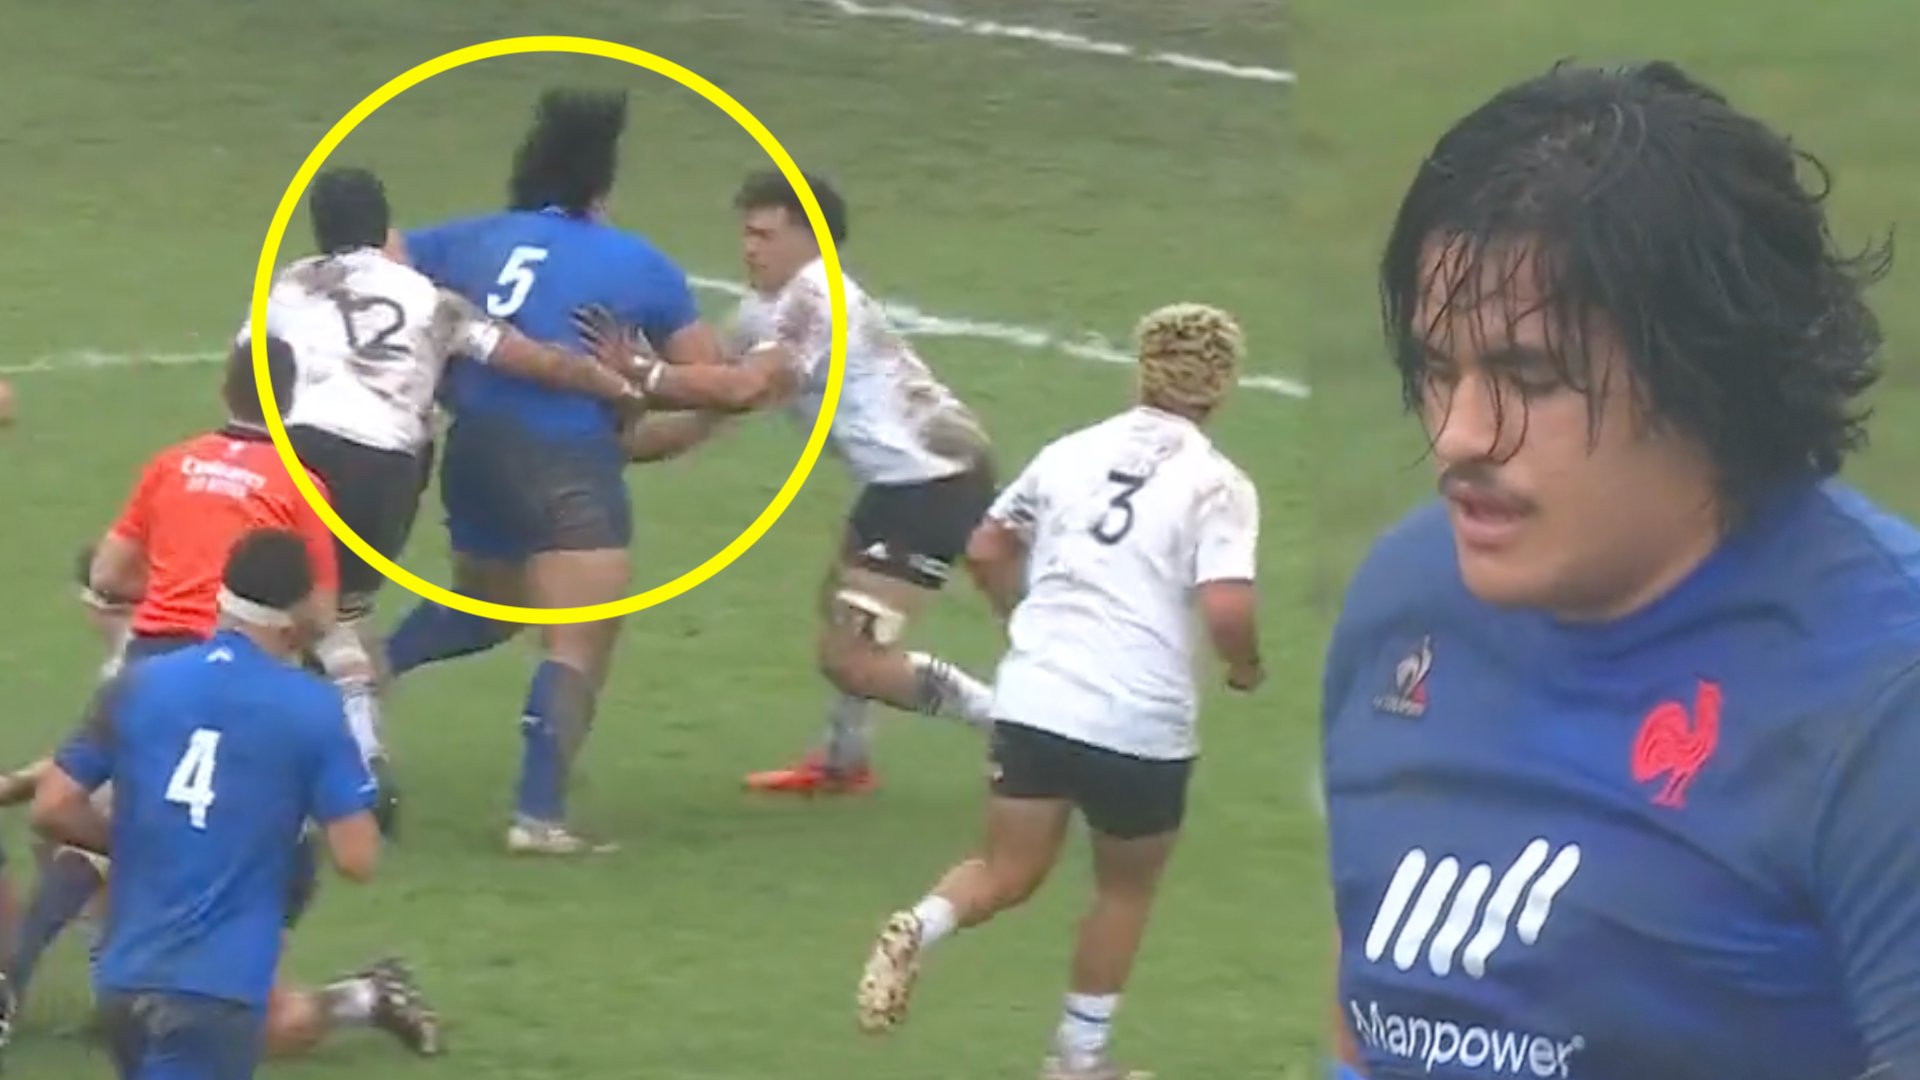 France's 149kg monster Posolo becomes the latest Tuilagi to destroy New Zealand